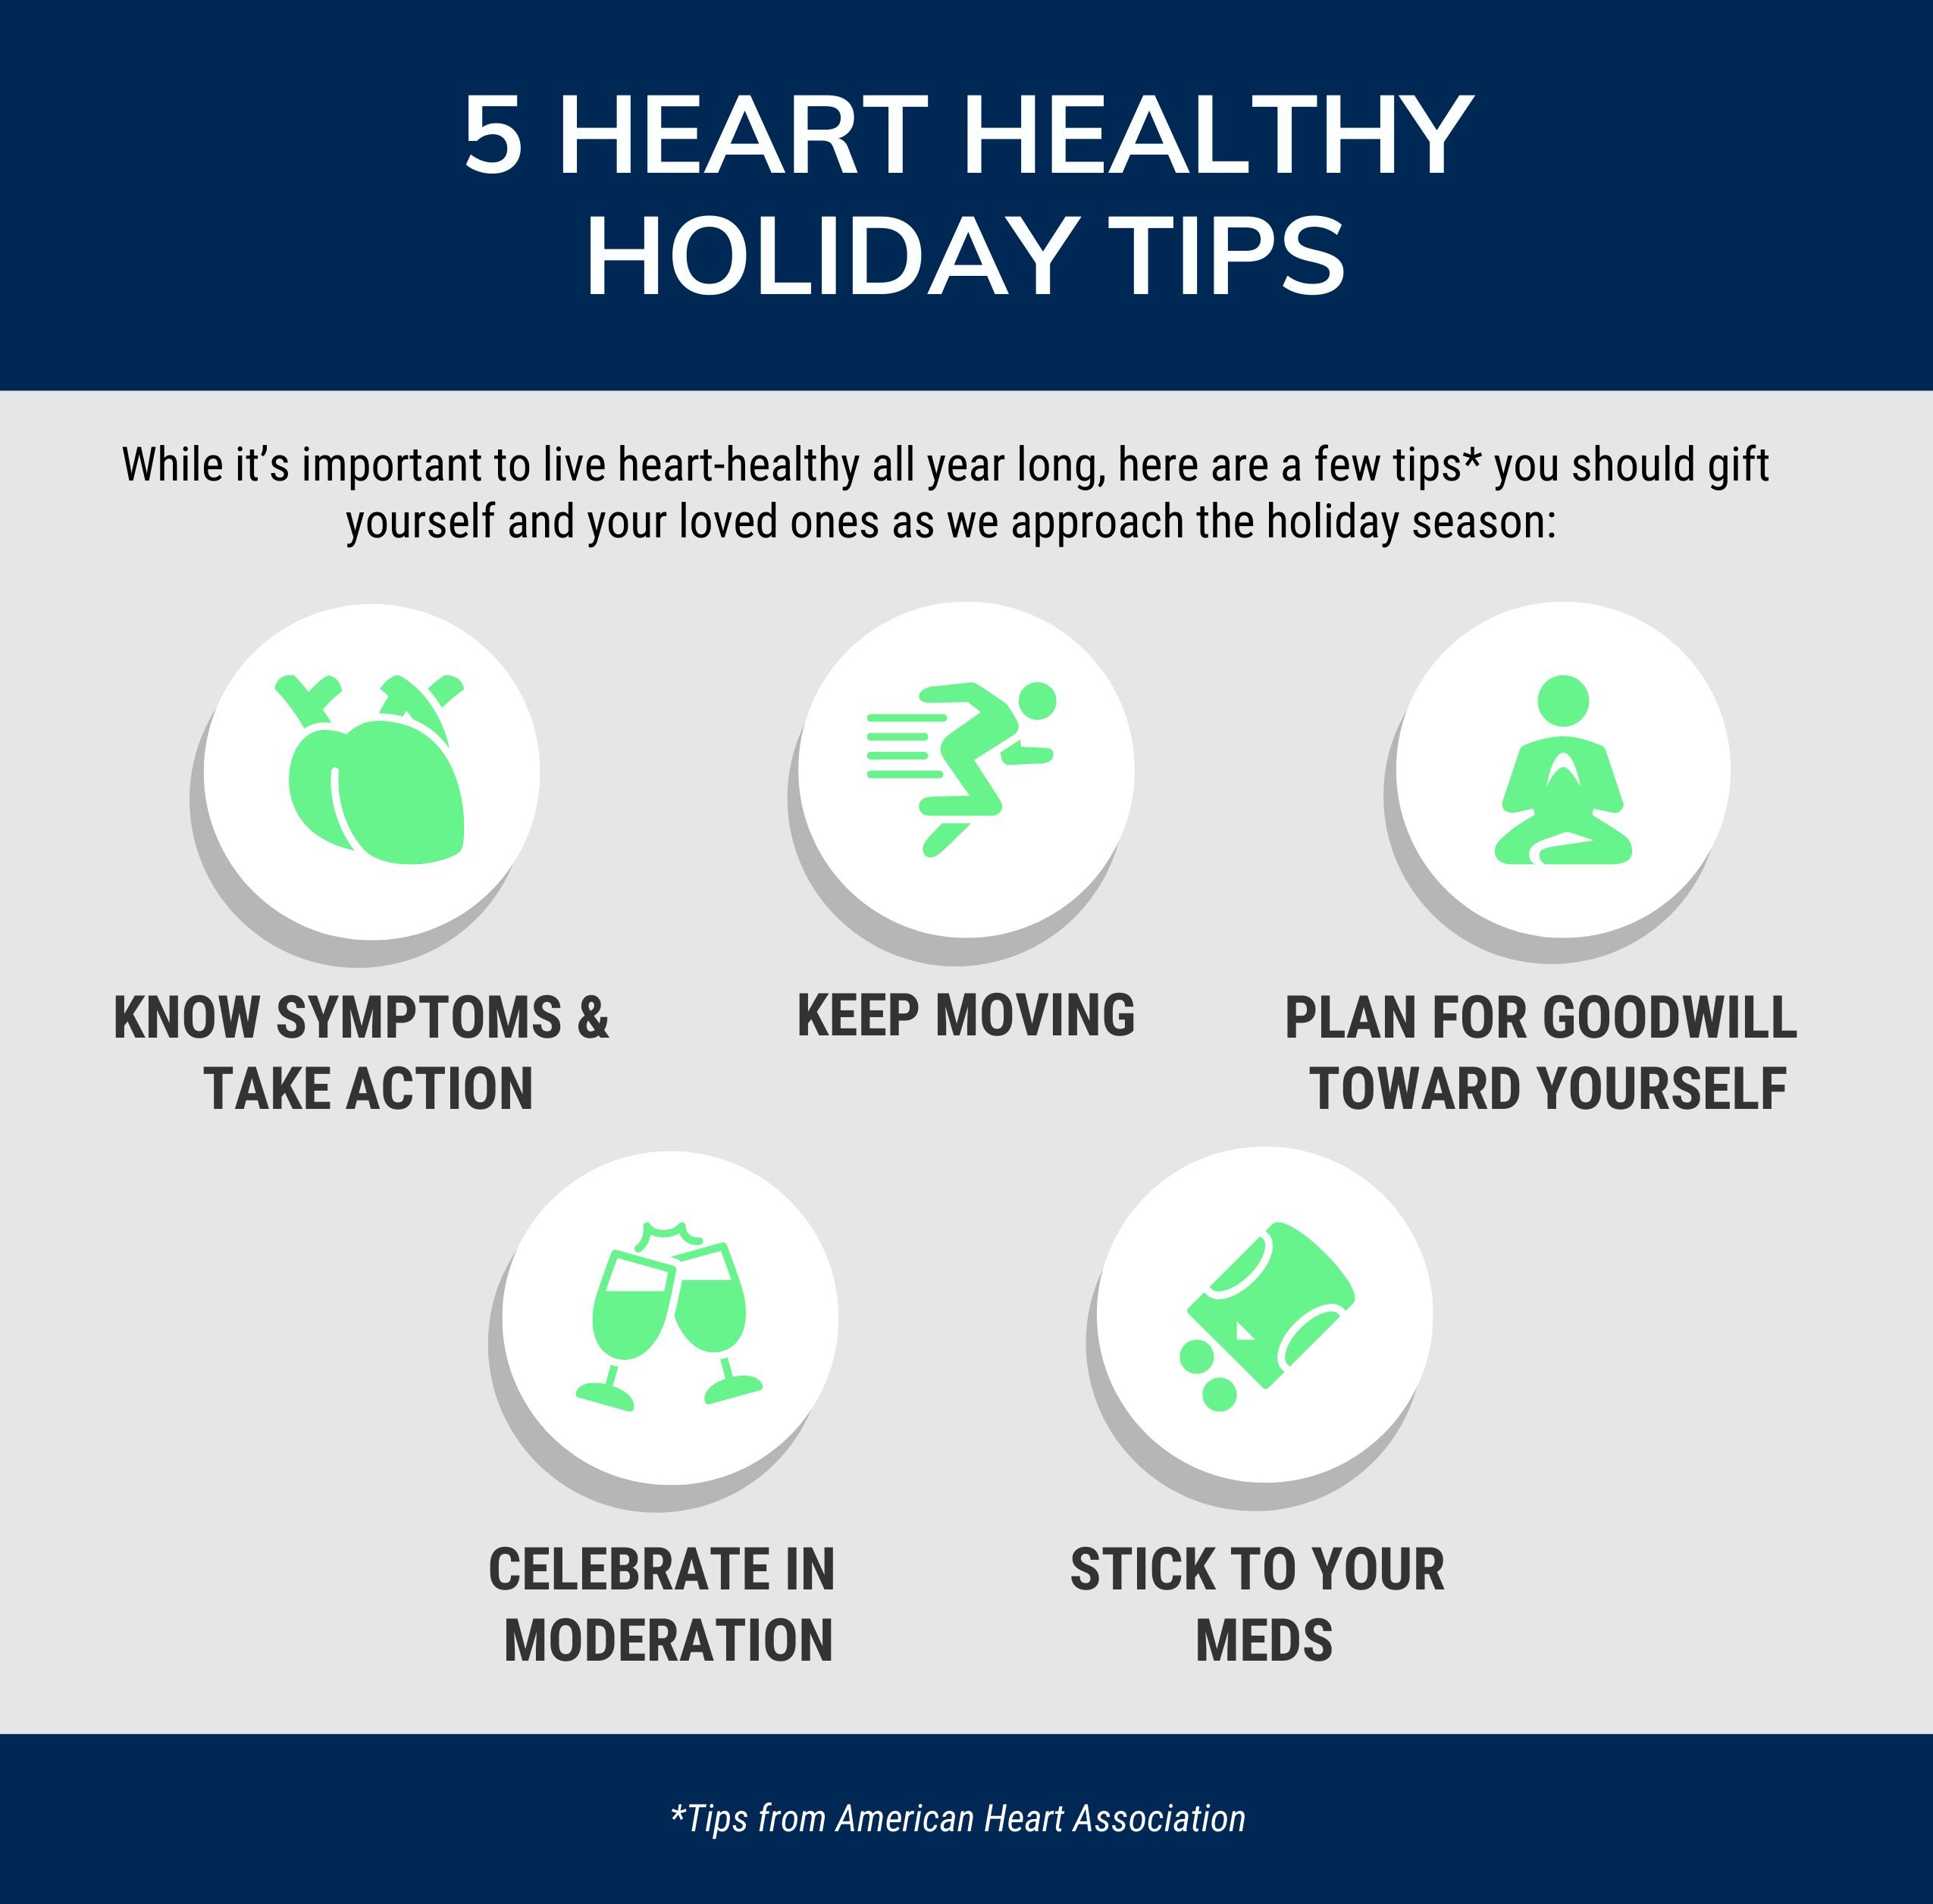 Stay heart healthy in the winter